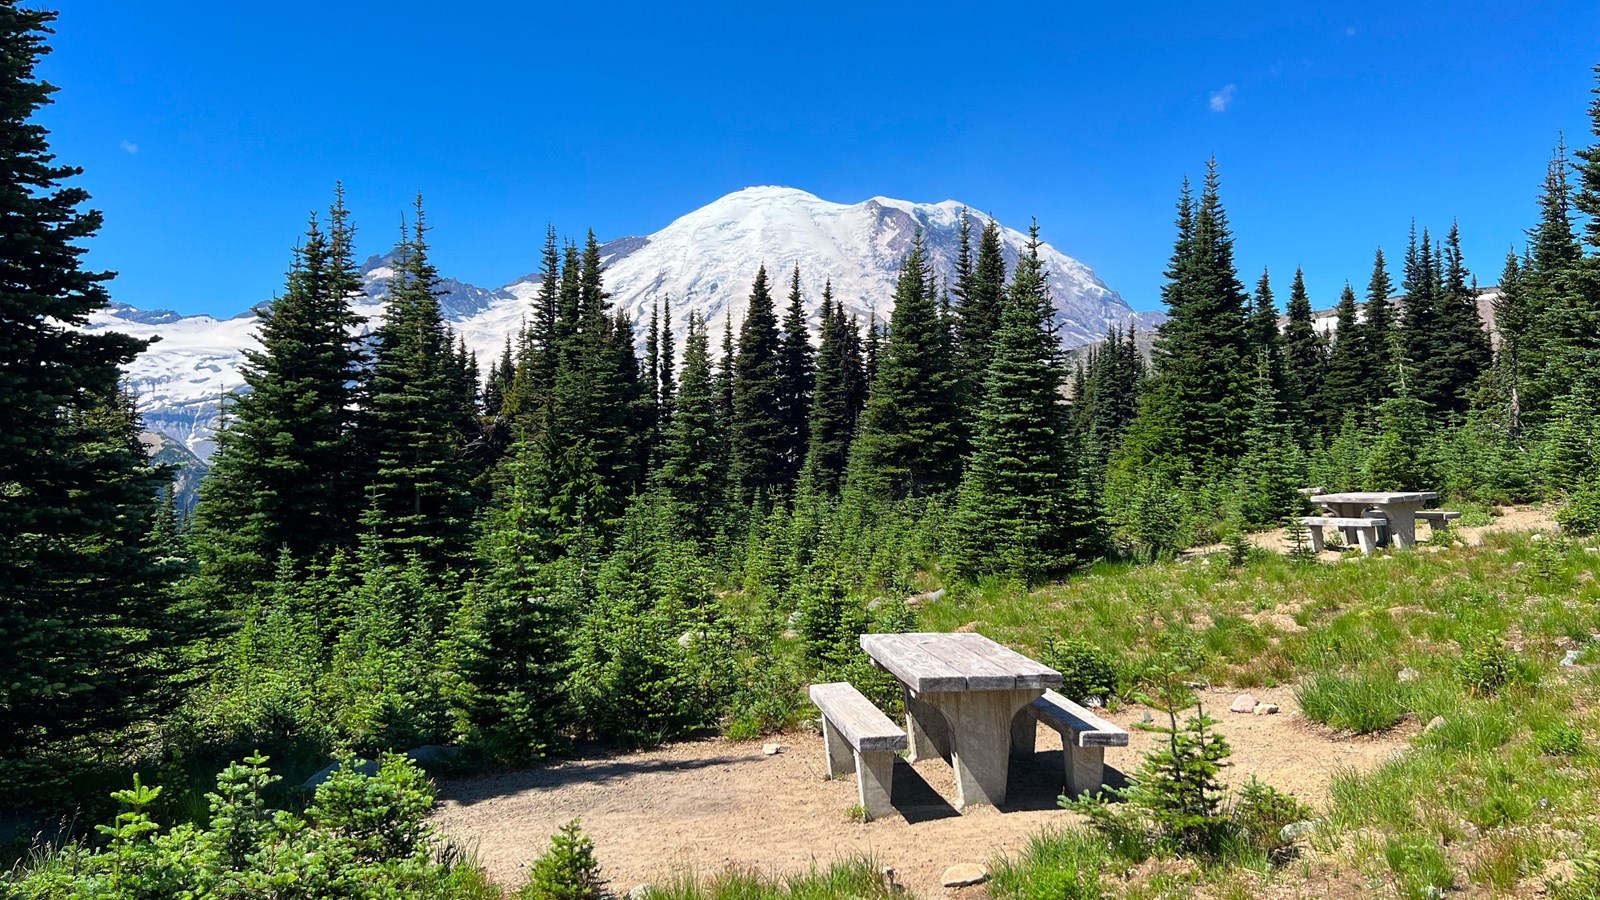 Picnic table in grassy meadow surrounded by trees with glaciated mountain in the background